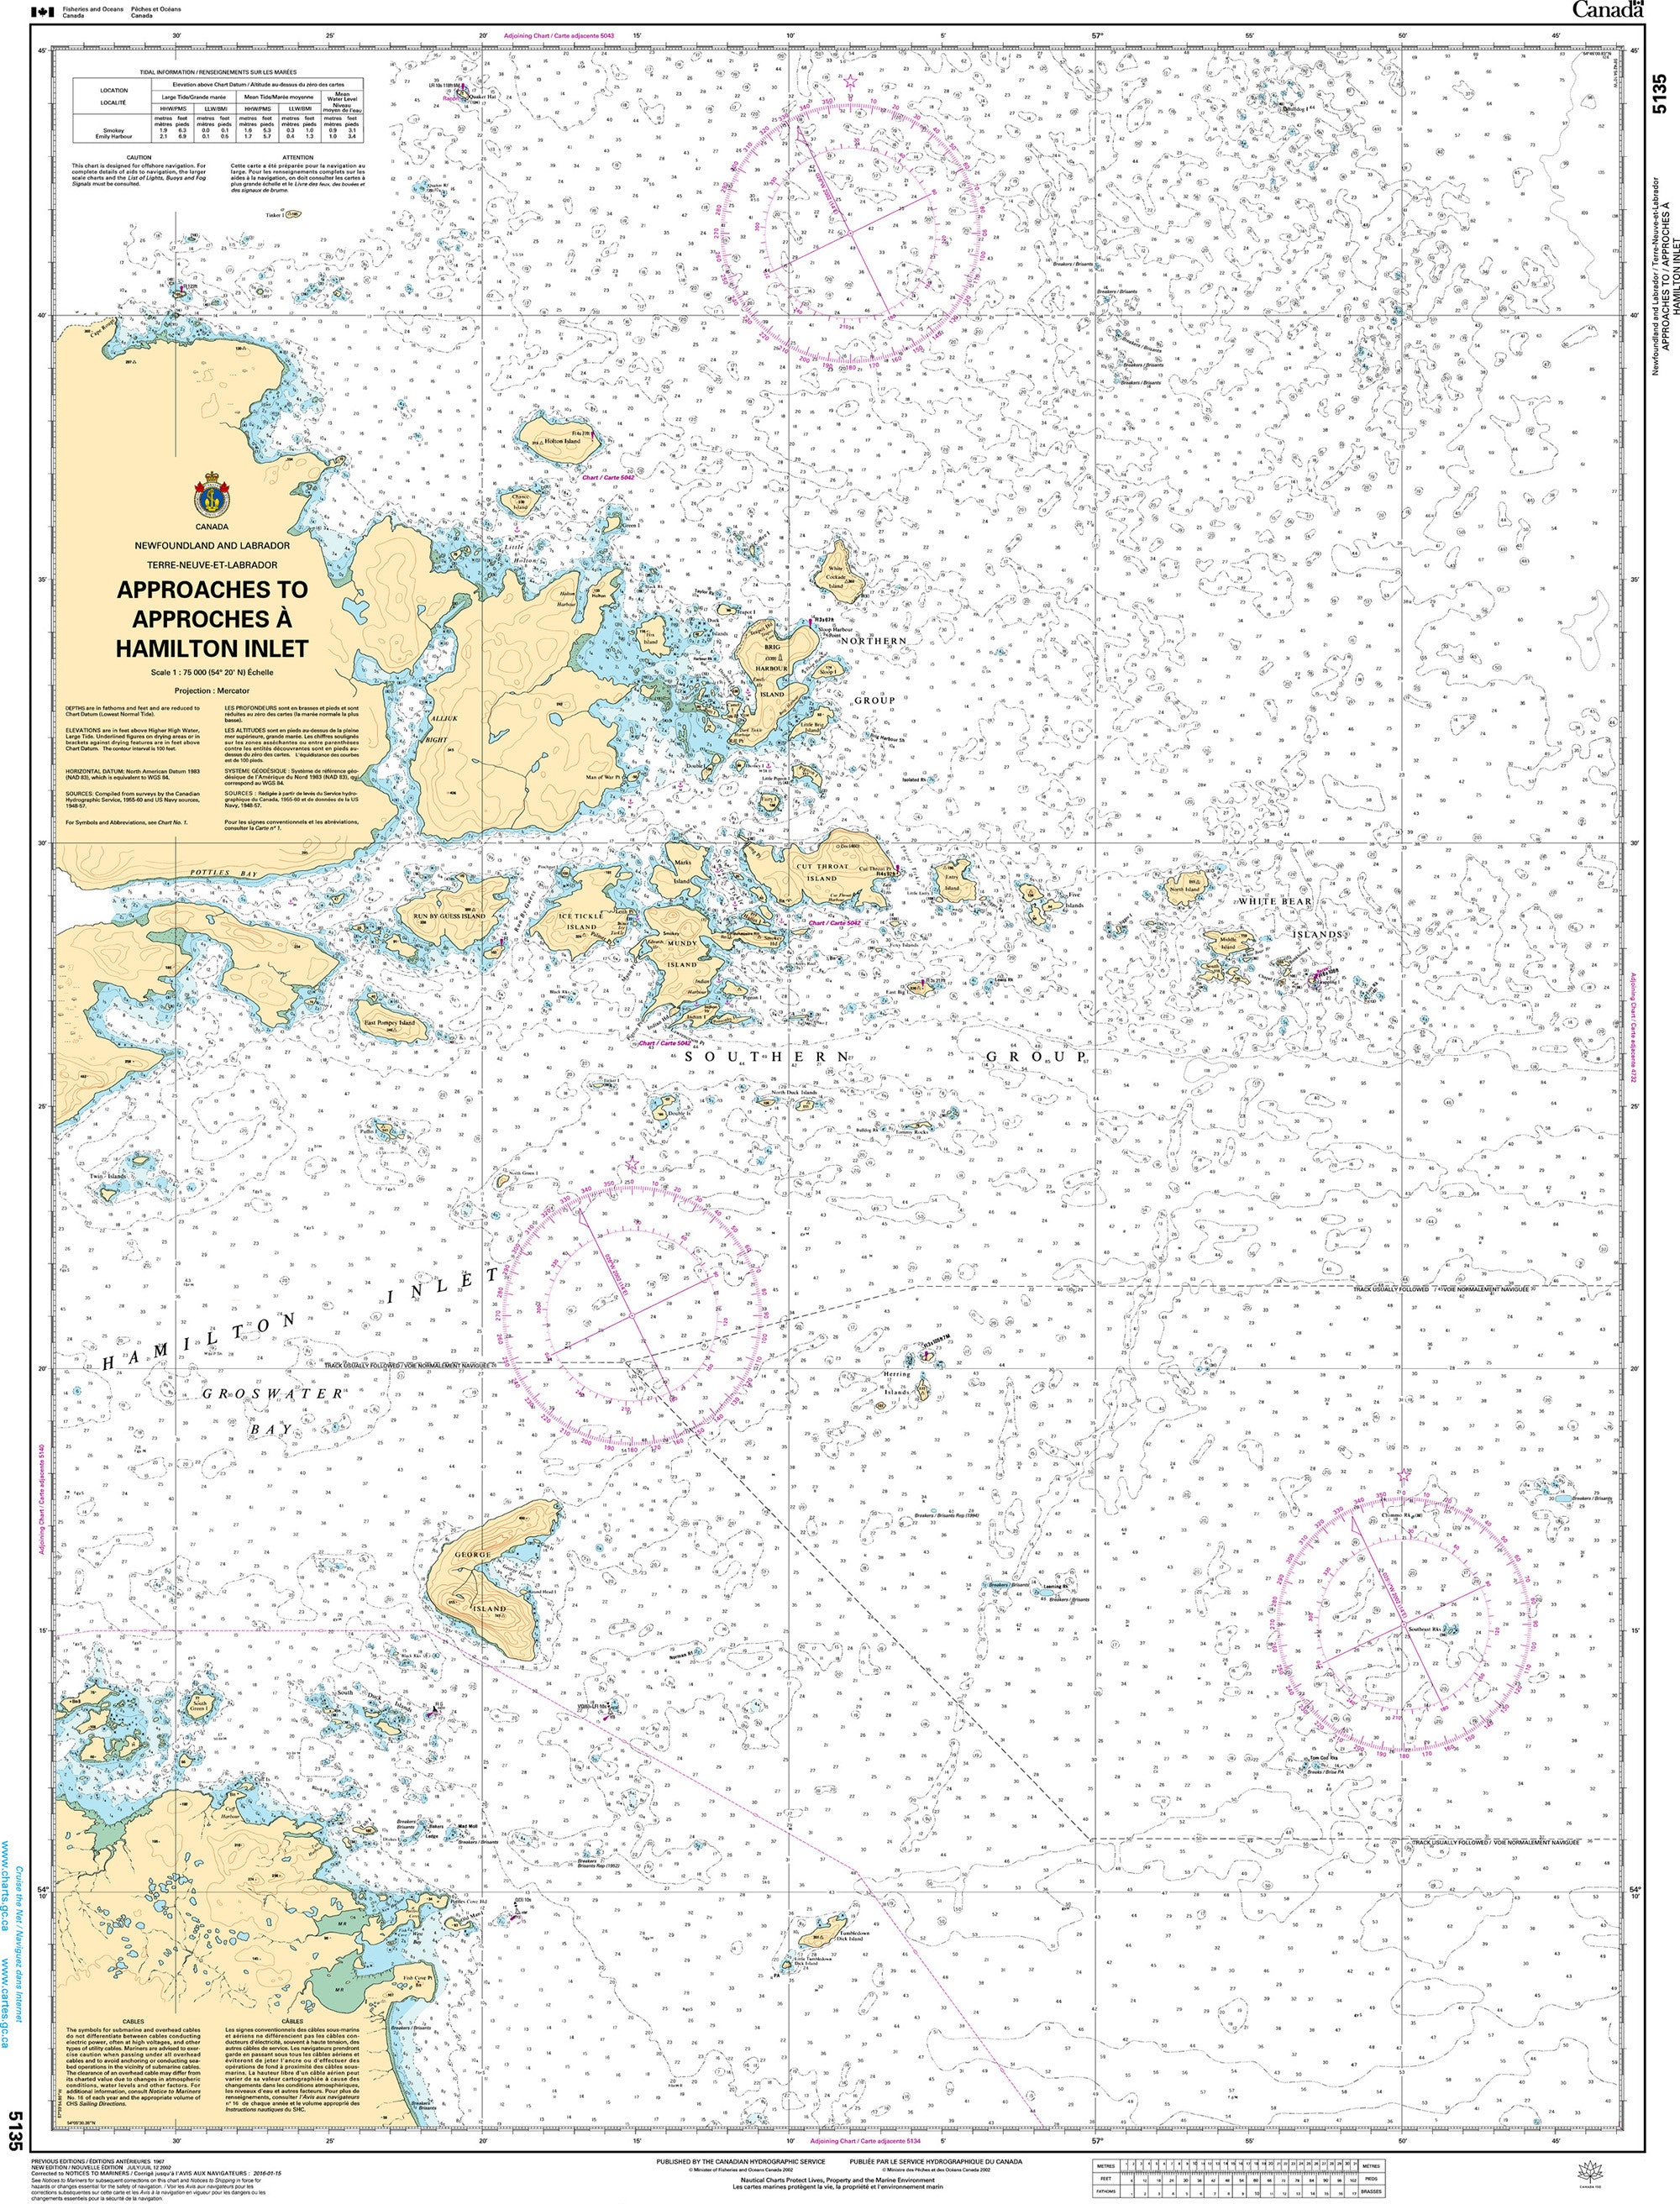 Canadian Hydrographic Service Nautical Chart CHS5135: Approaches to Hamilton Inlet, Tumbledown Dick Island to Quaker Hat